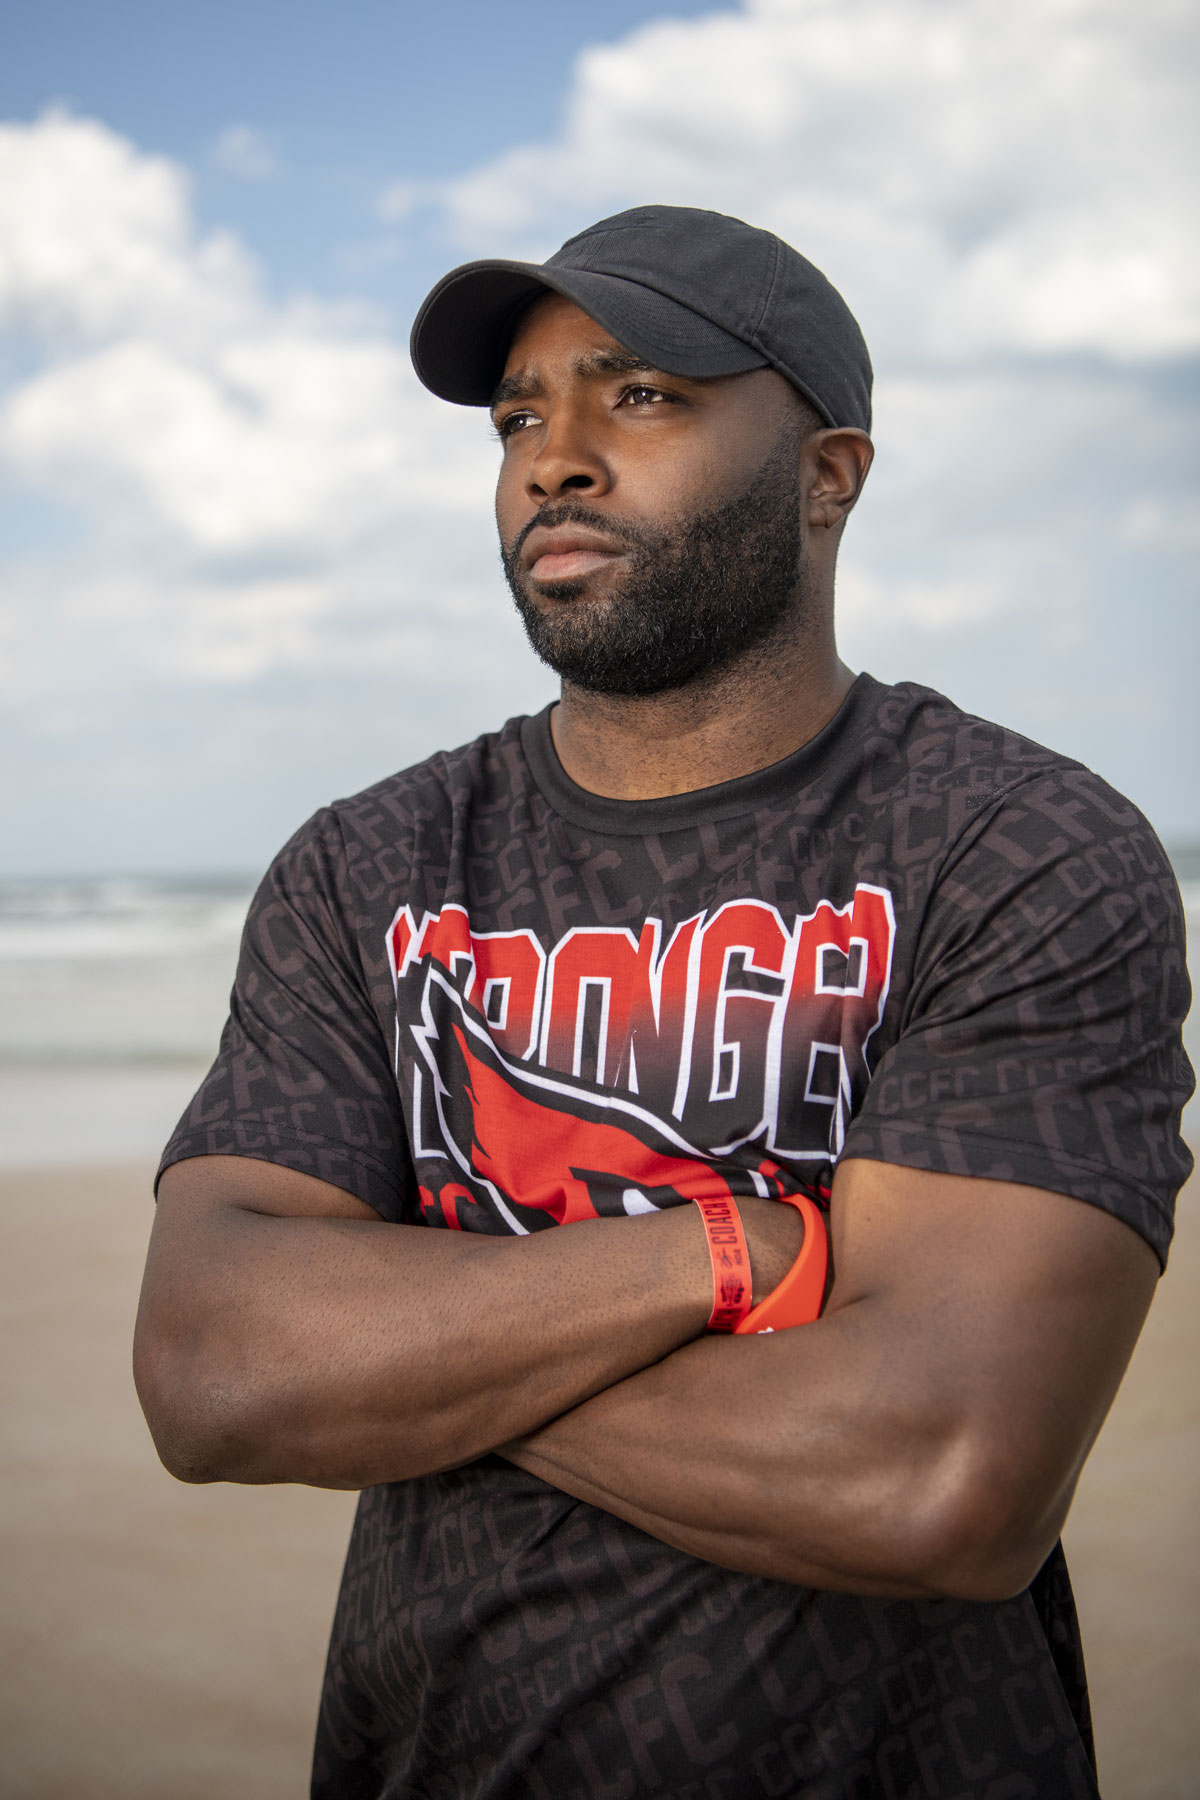 Photo of coach Vontae Johnson from Cheer, the current #1 show on Netflix